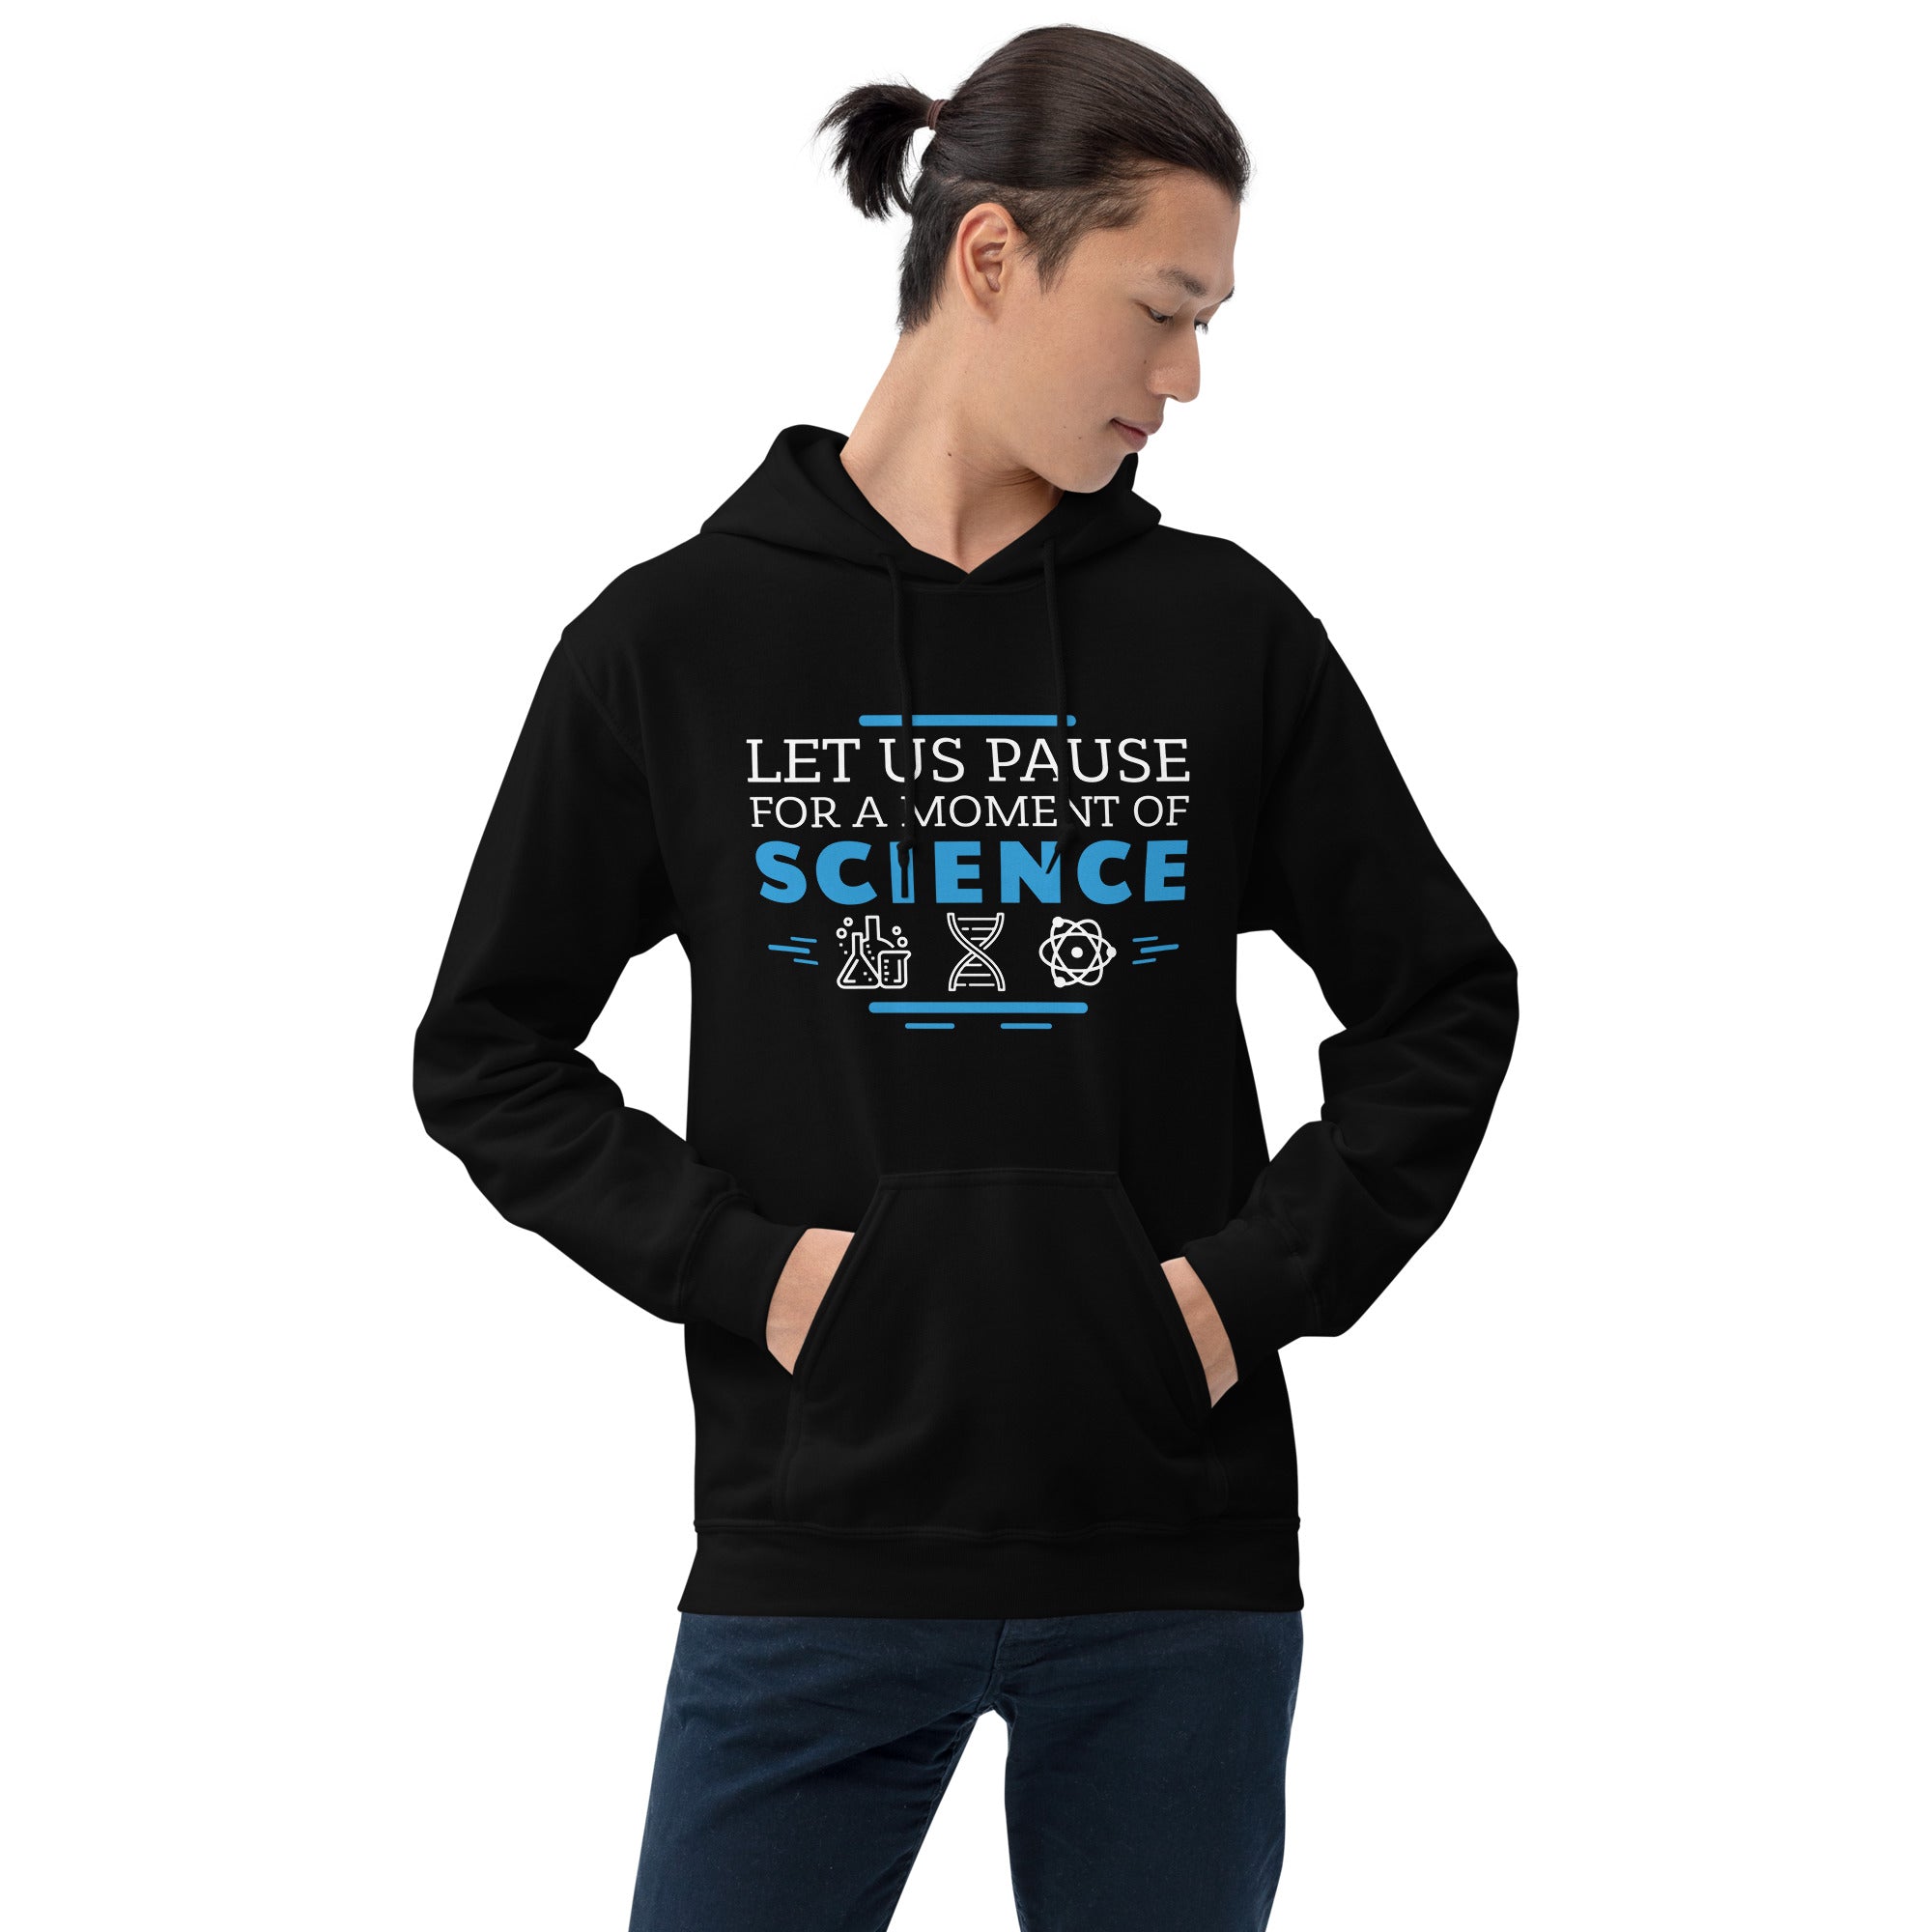 Moment of Science - Unisex Hoodie